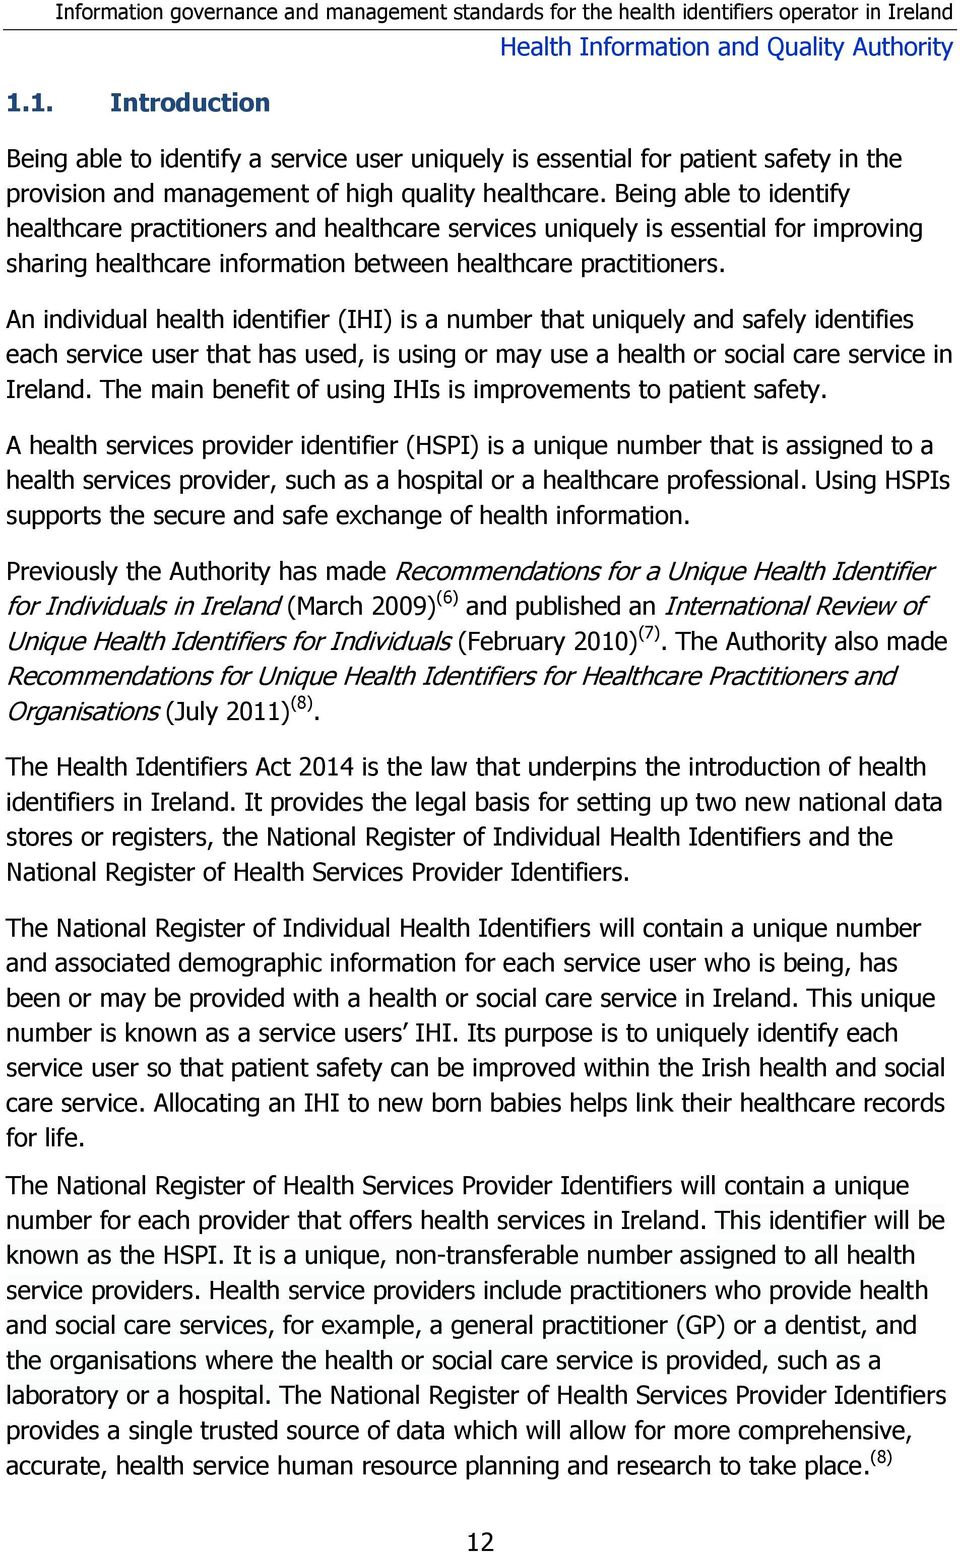 An individual health identifier (IHI) is a number that uniquely and safely identifies each service user that has used, is using or may use a health or social care service in Ireland.